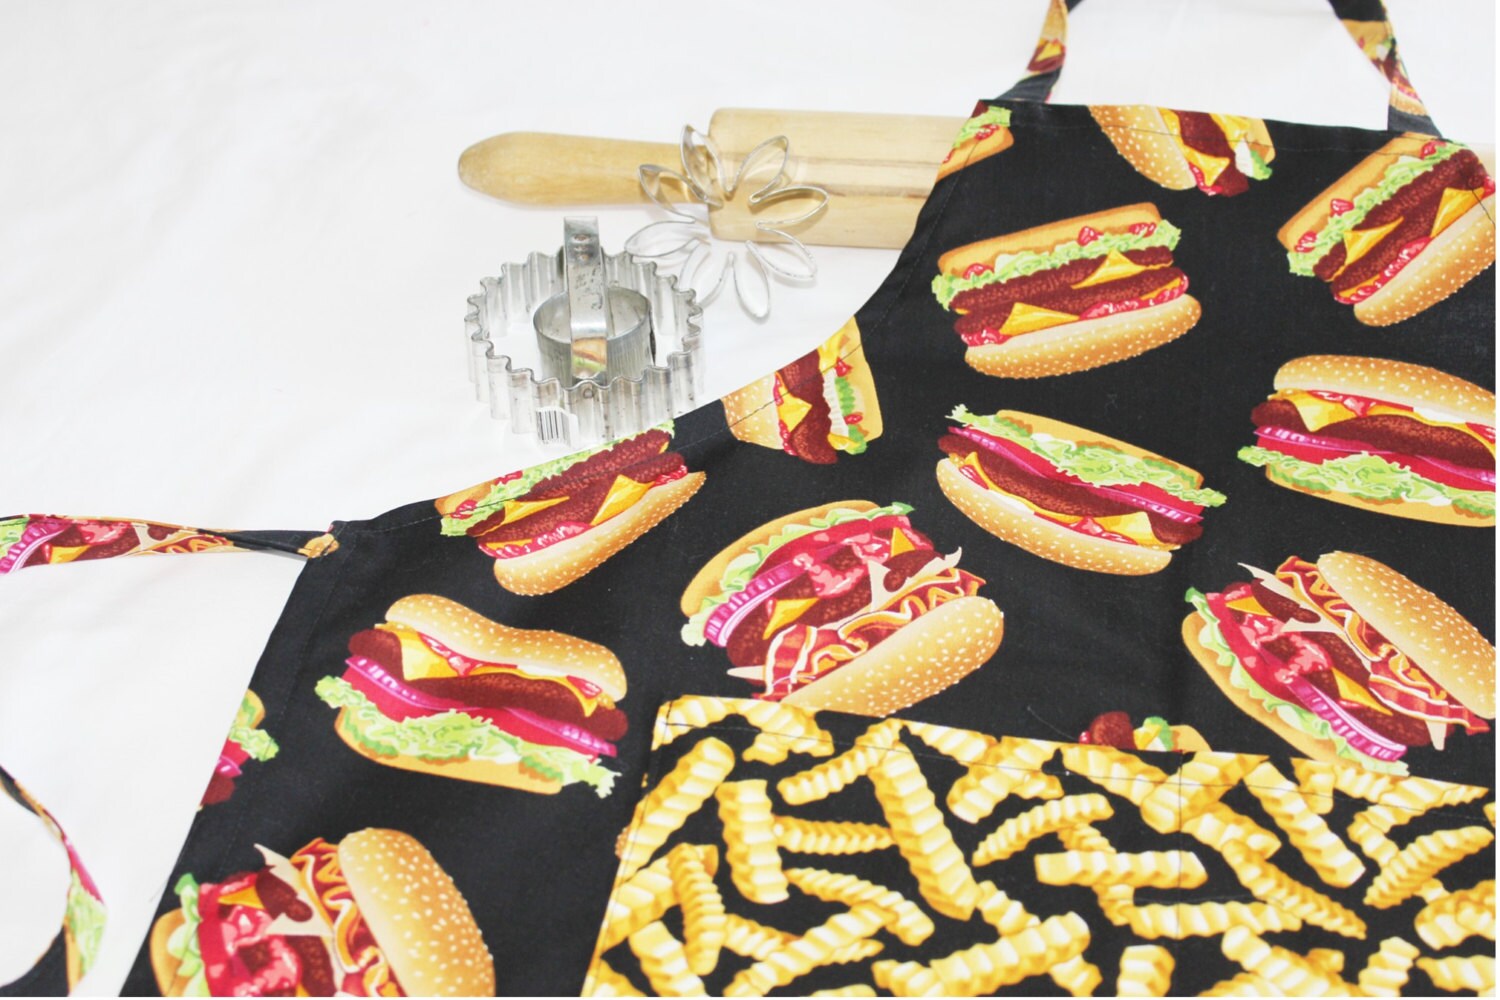 Hot Dog - Hot Dog And Mustard - Kitchen Gifts - Fun Aprons - Foodies -  Chefs - Kids Apron for Sale by happygiftideas